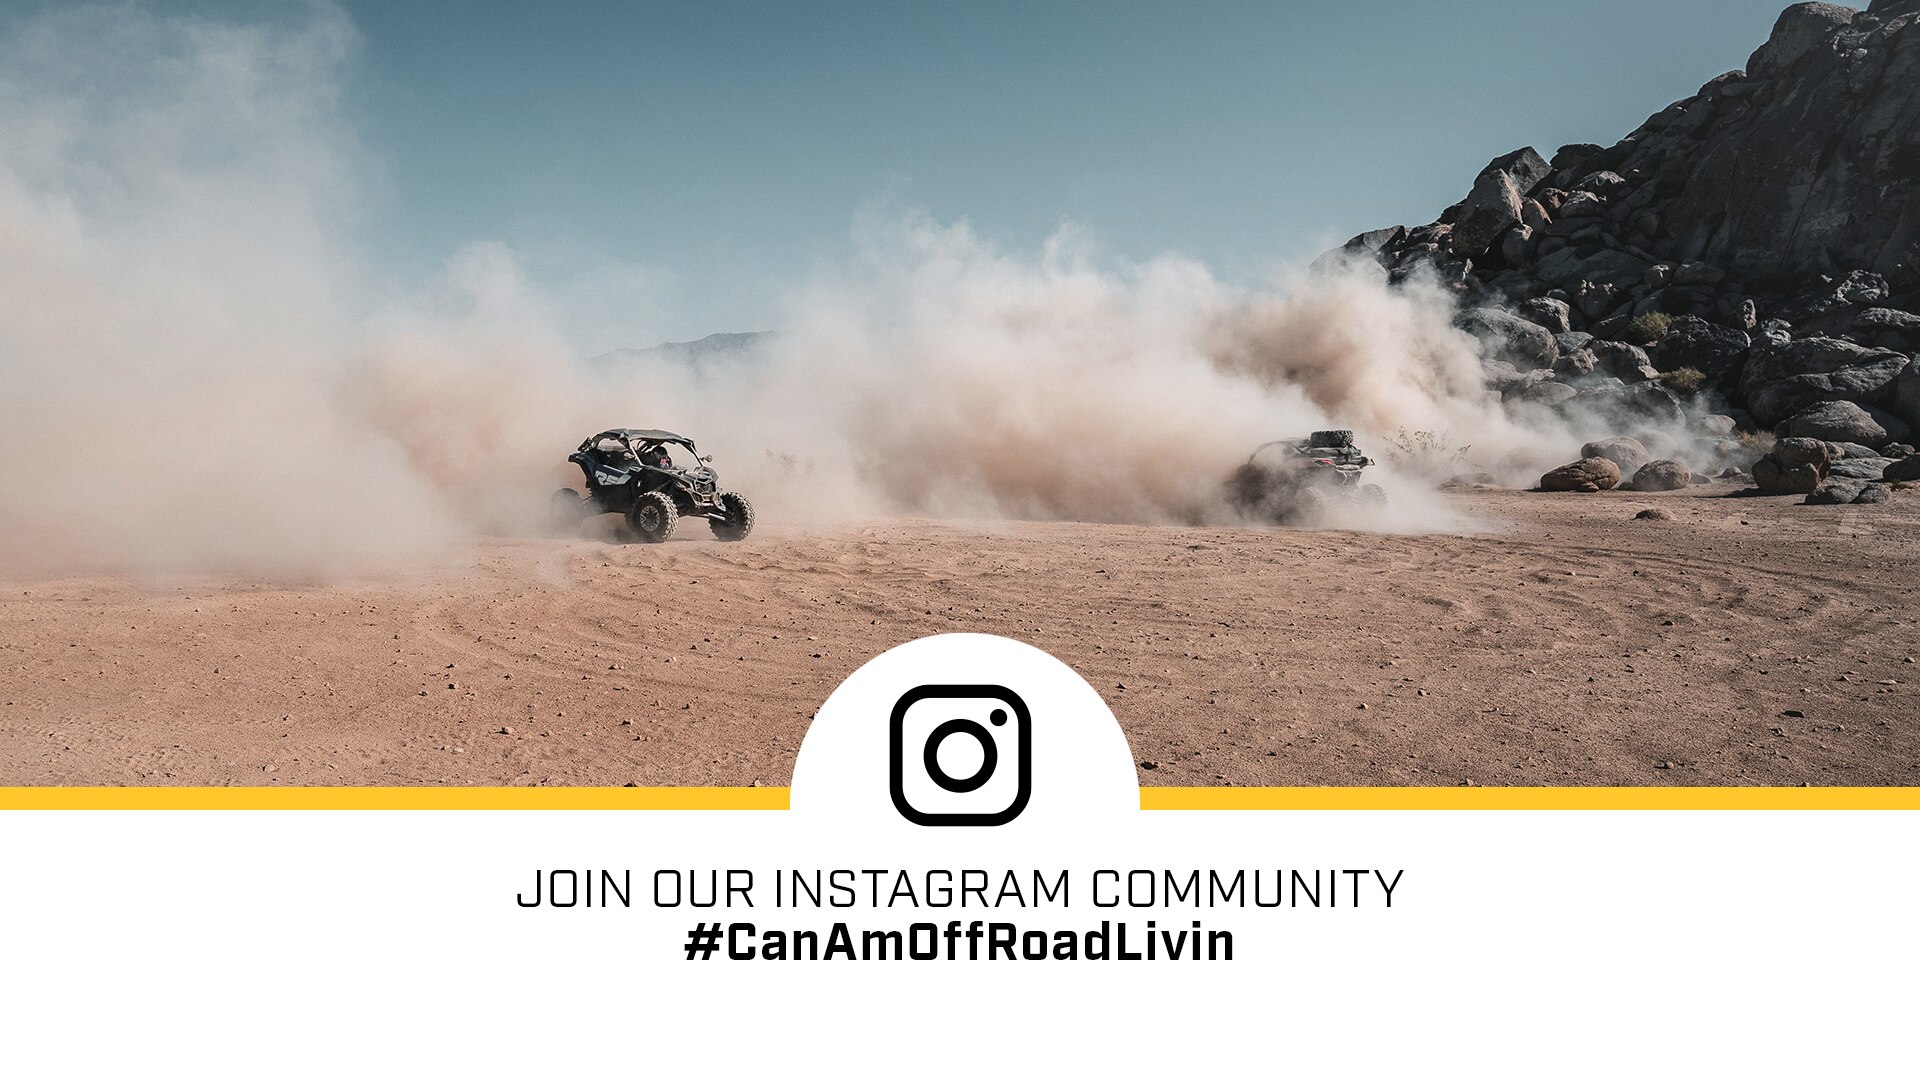 2022 Can-Am Off-Road Lineup presented on Instagram